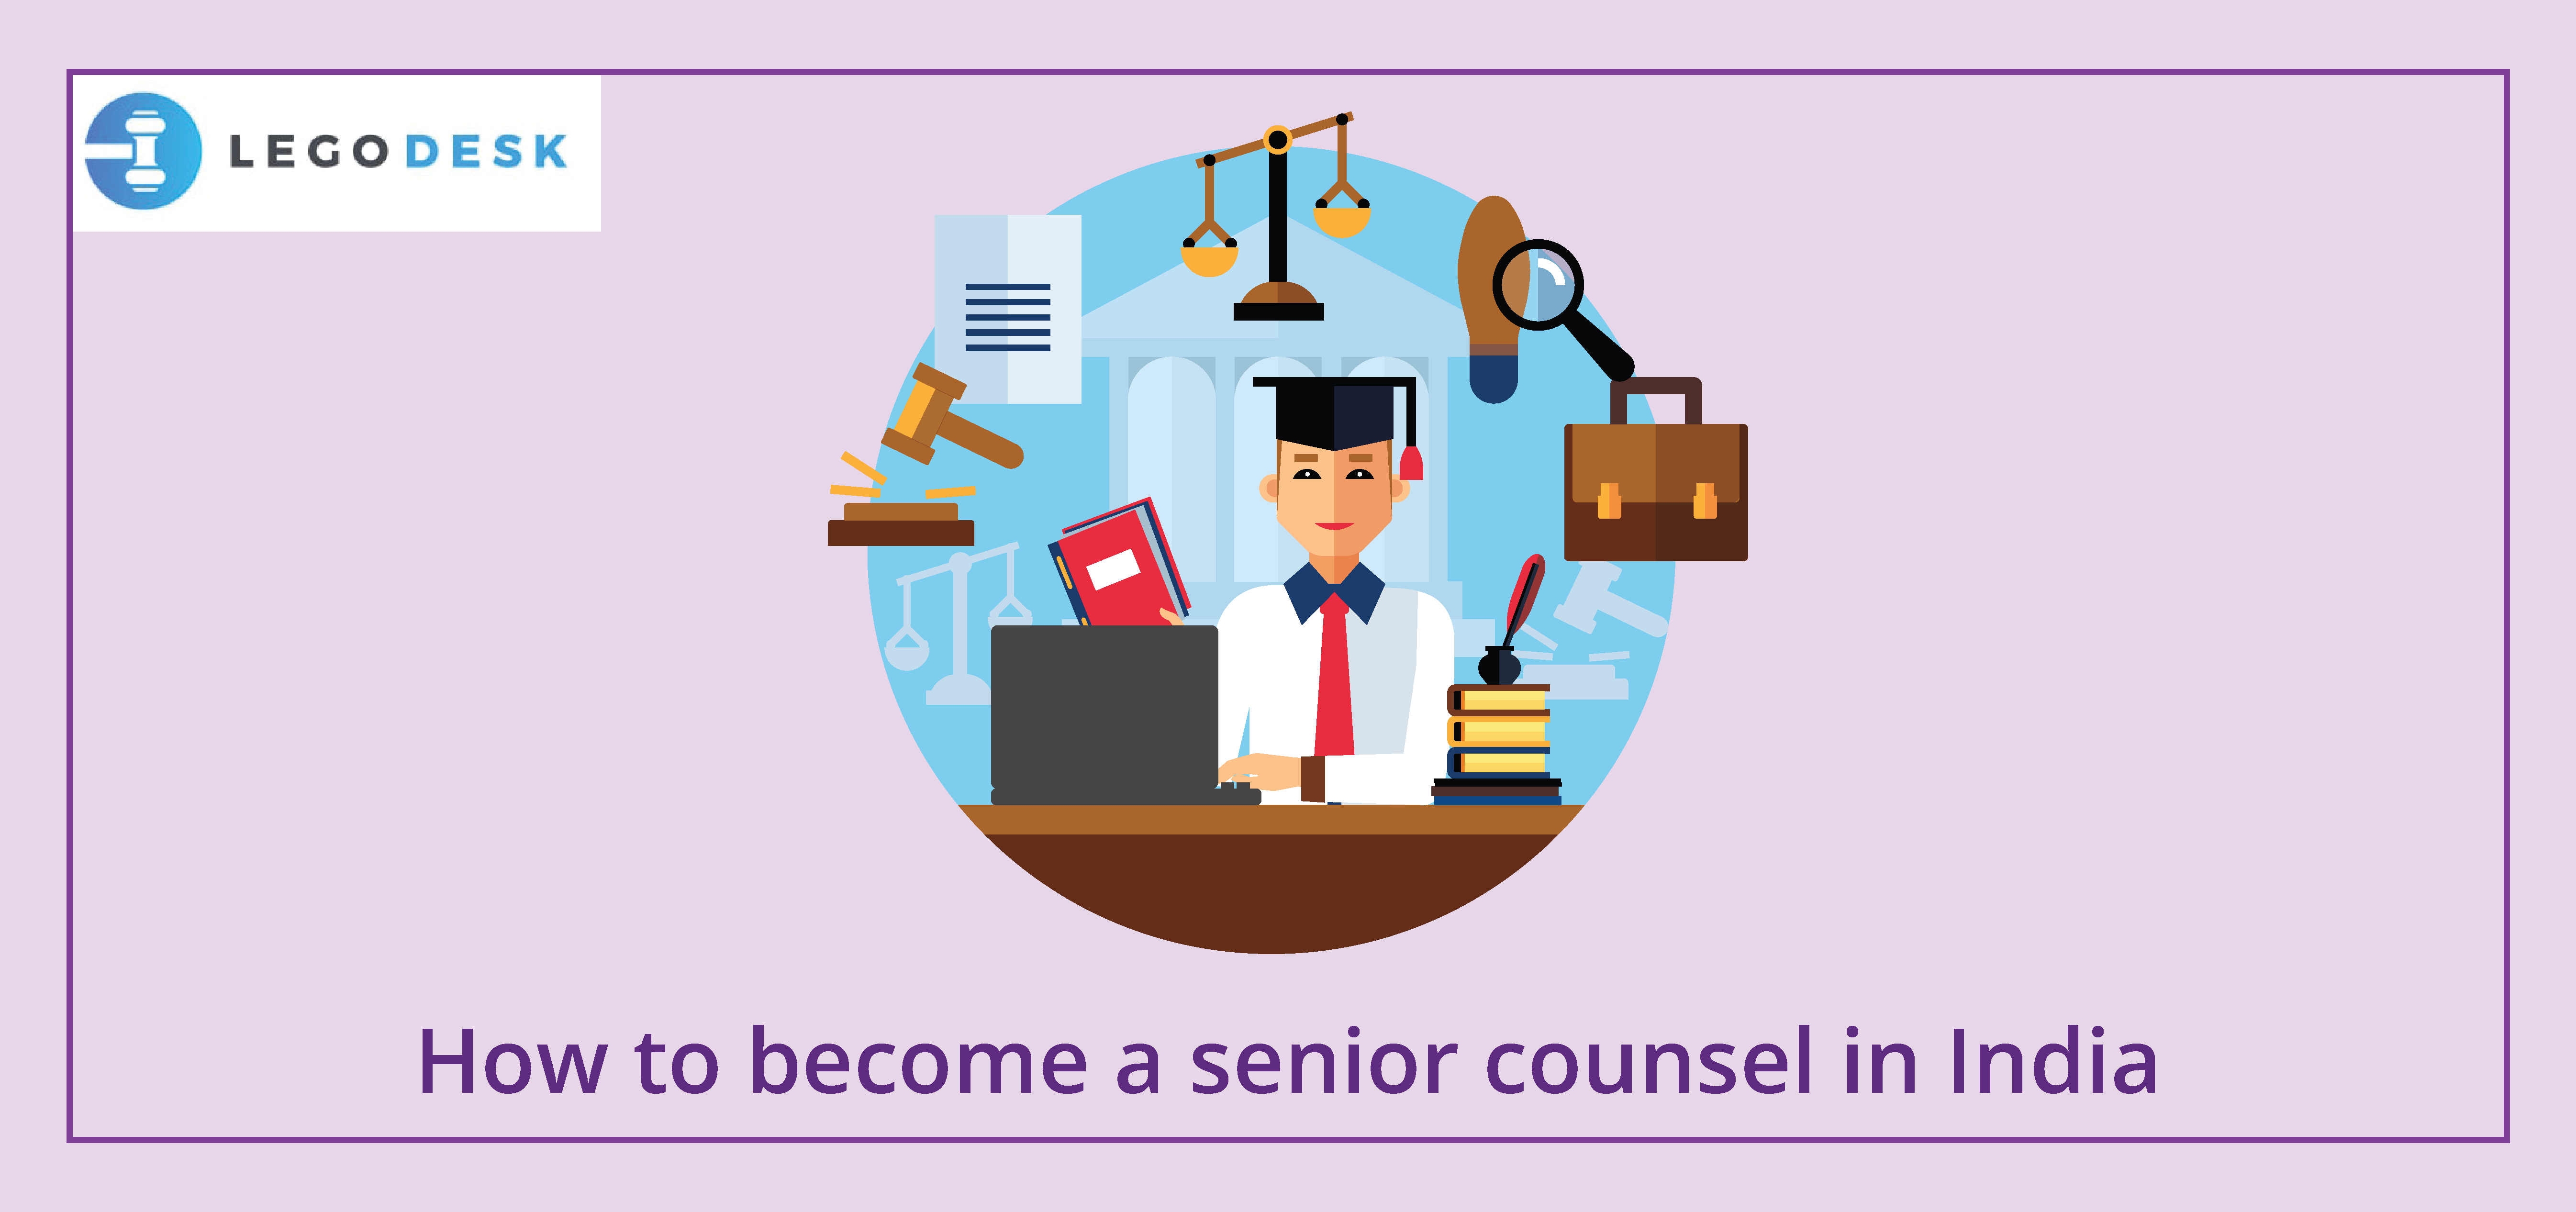 How to Become a Senior Counsel in India?